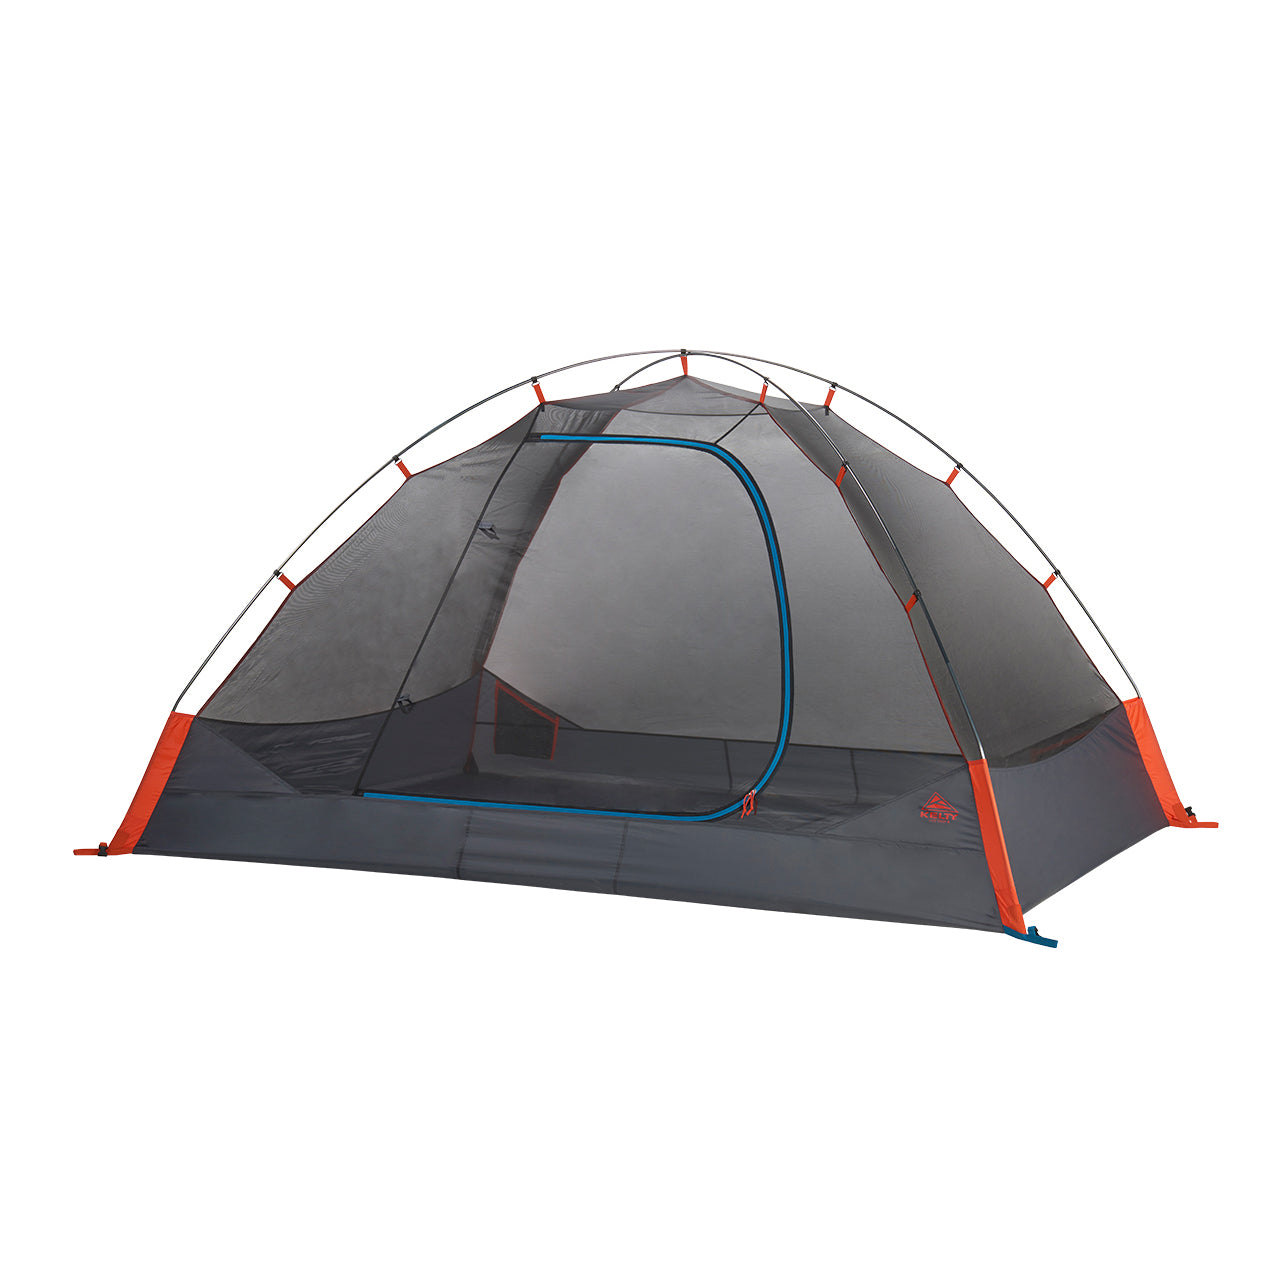 kelty late start 4 person tent no fly front view in color dark grey with orange accents